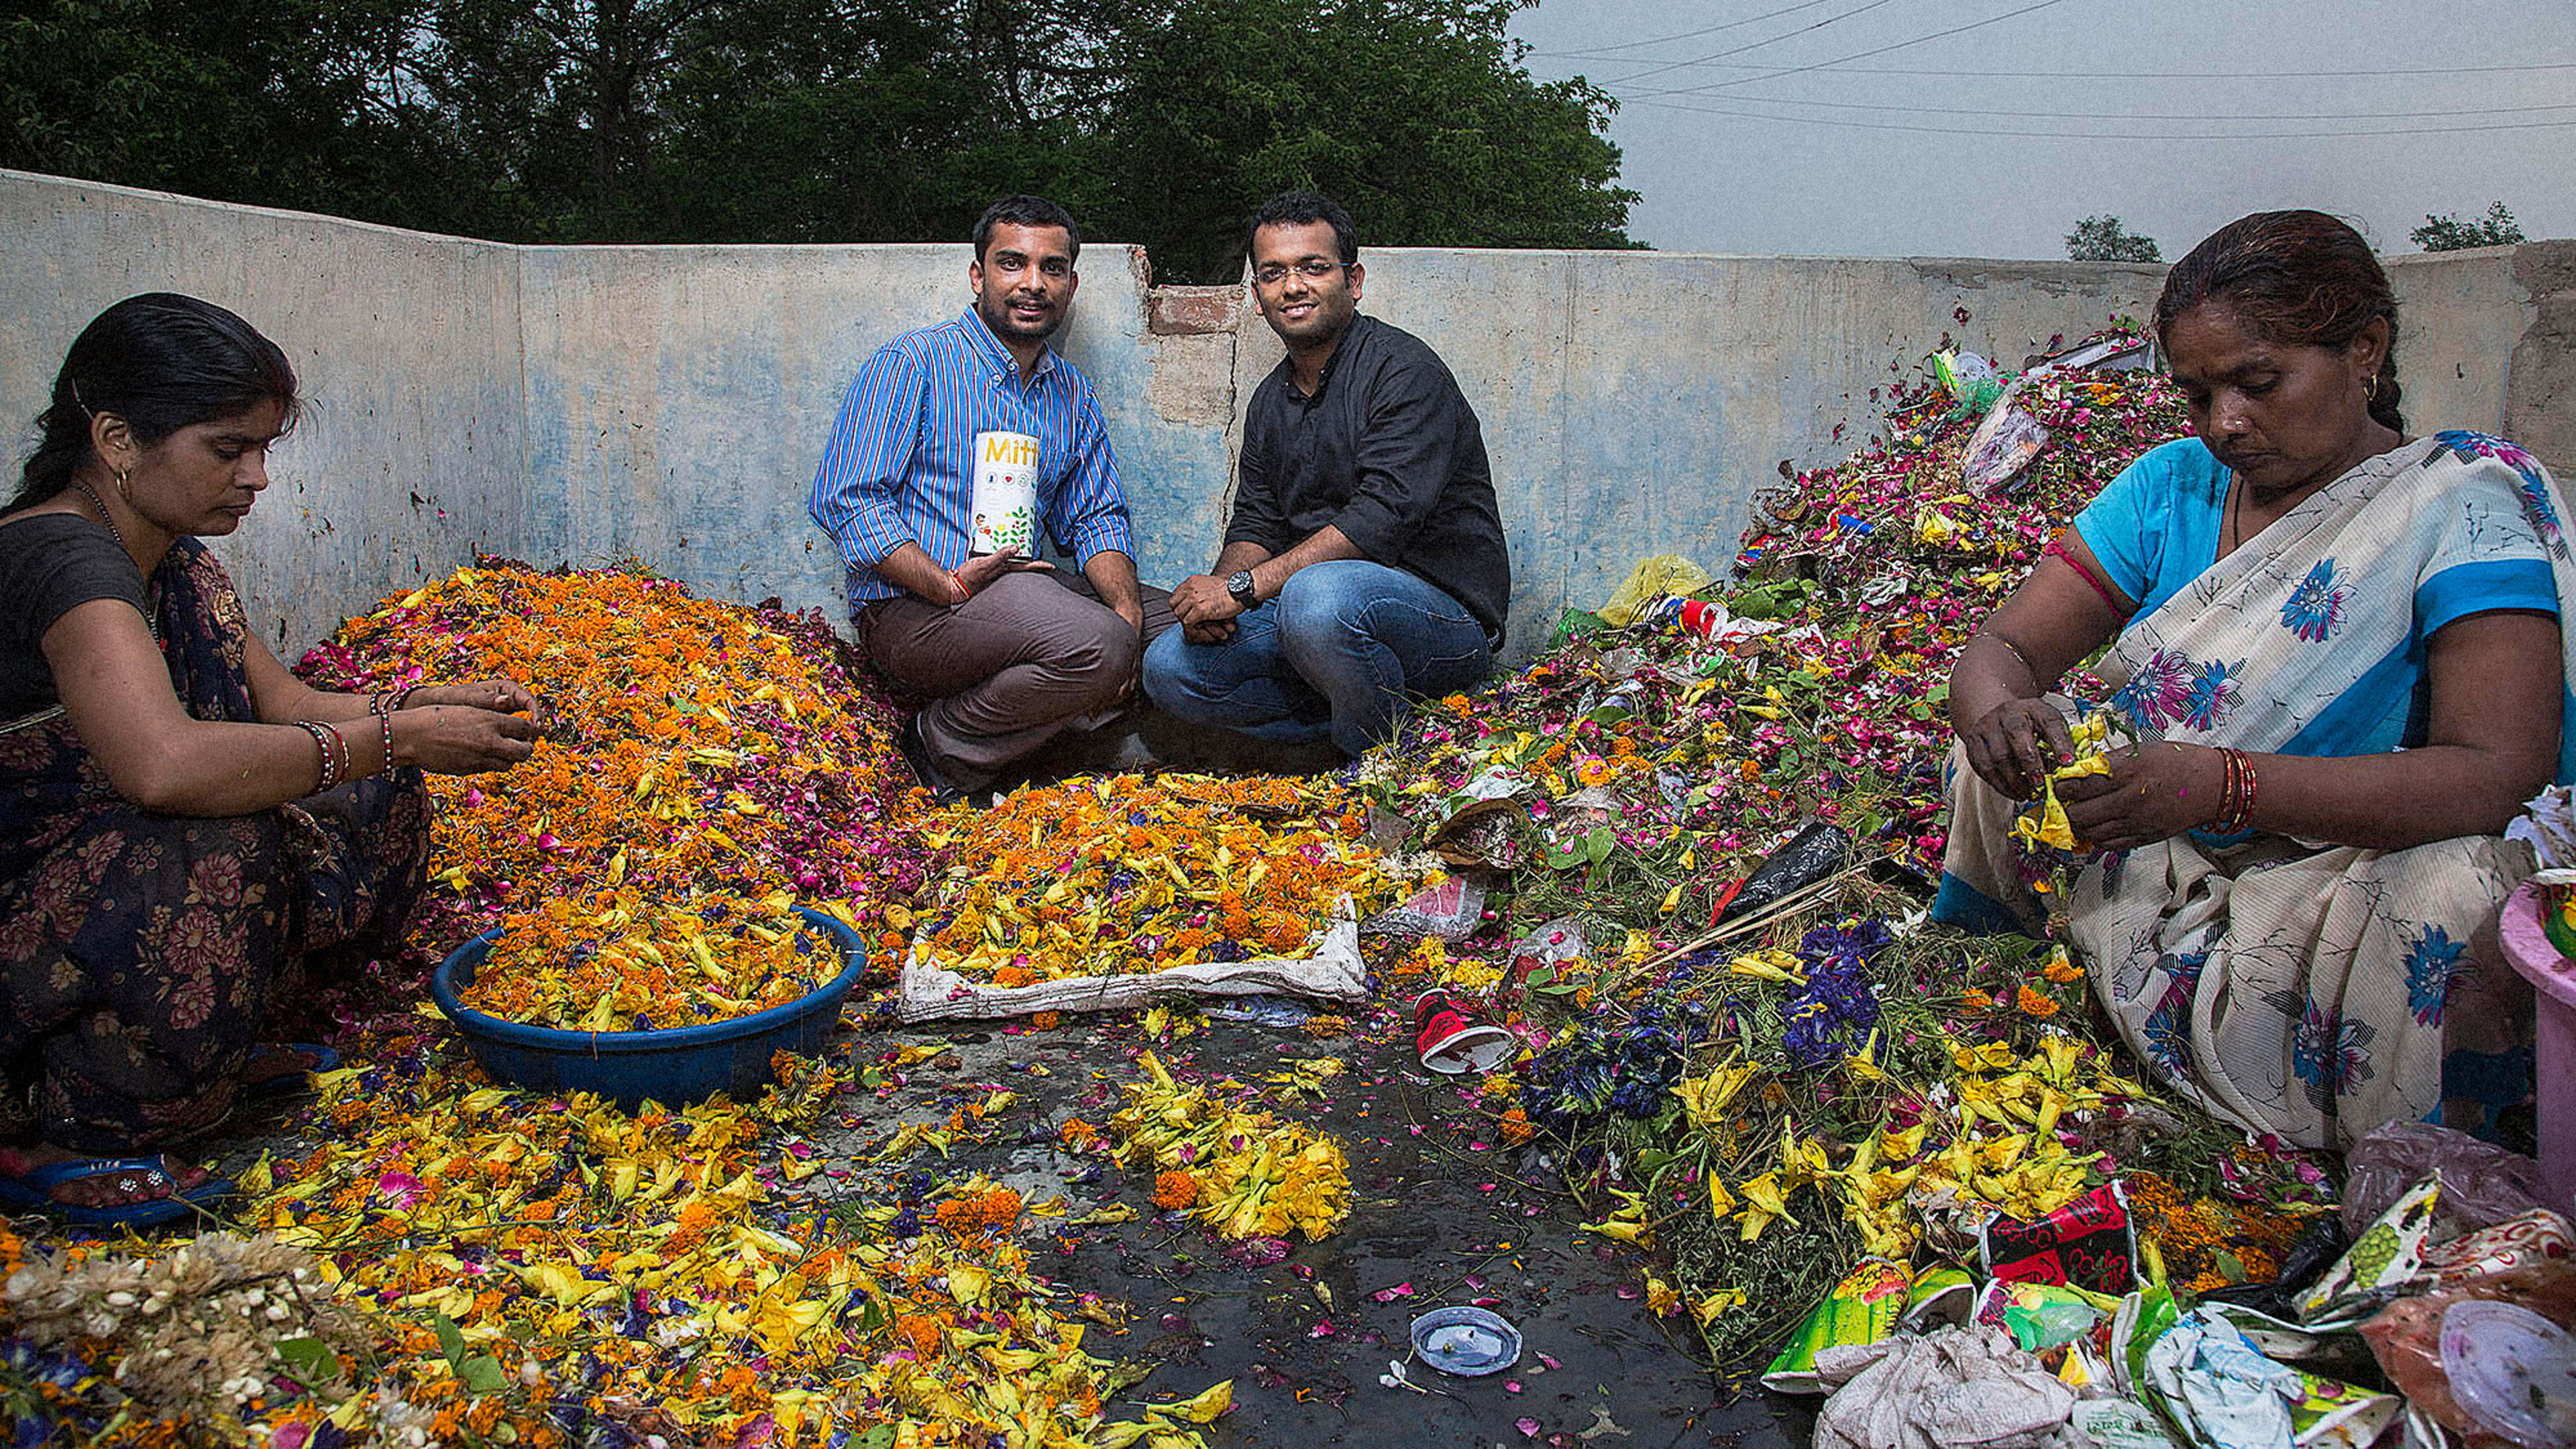 These Indian Entrepreneurs Upcycle Leftover Religious Flowers Into Useful Products